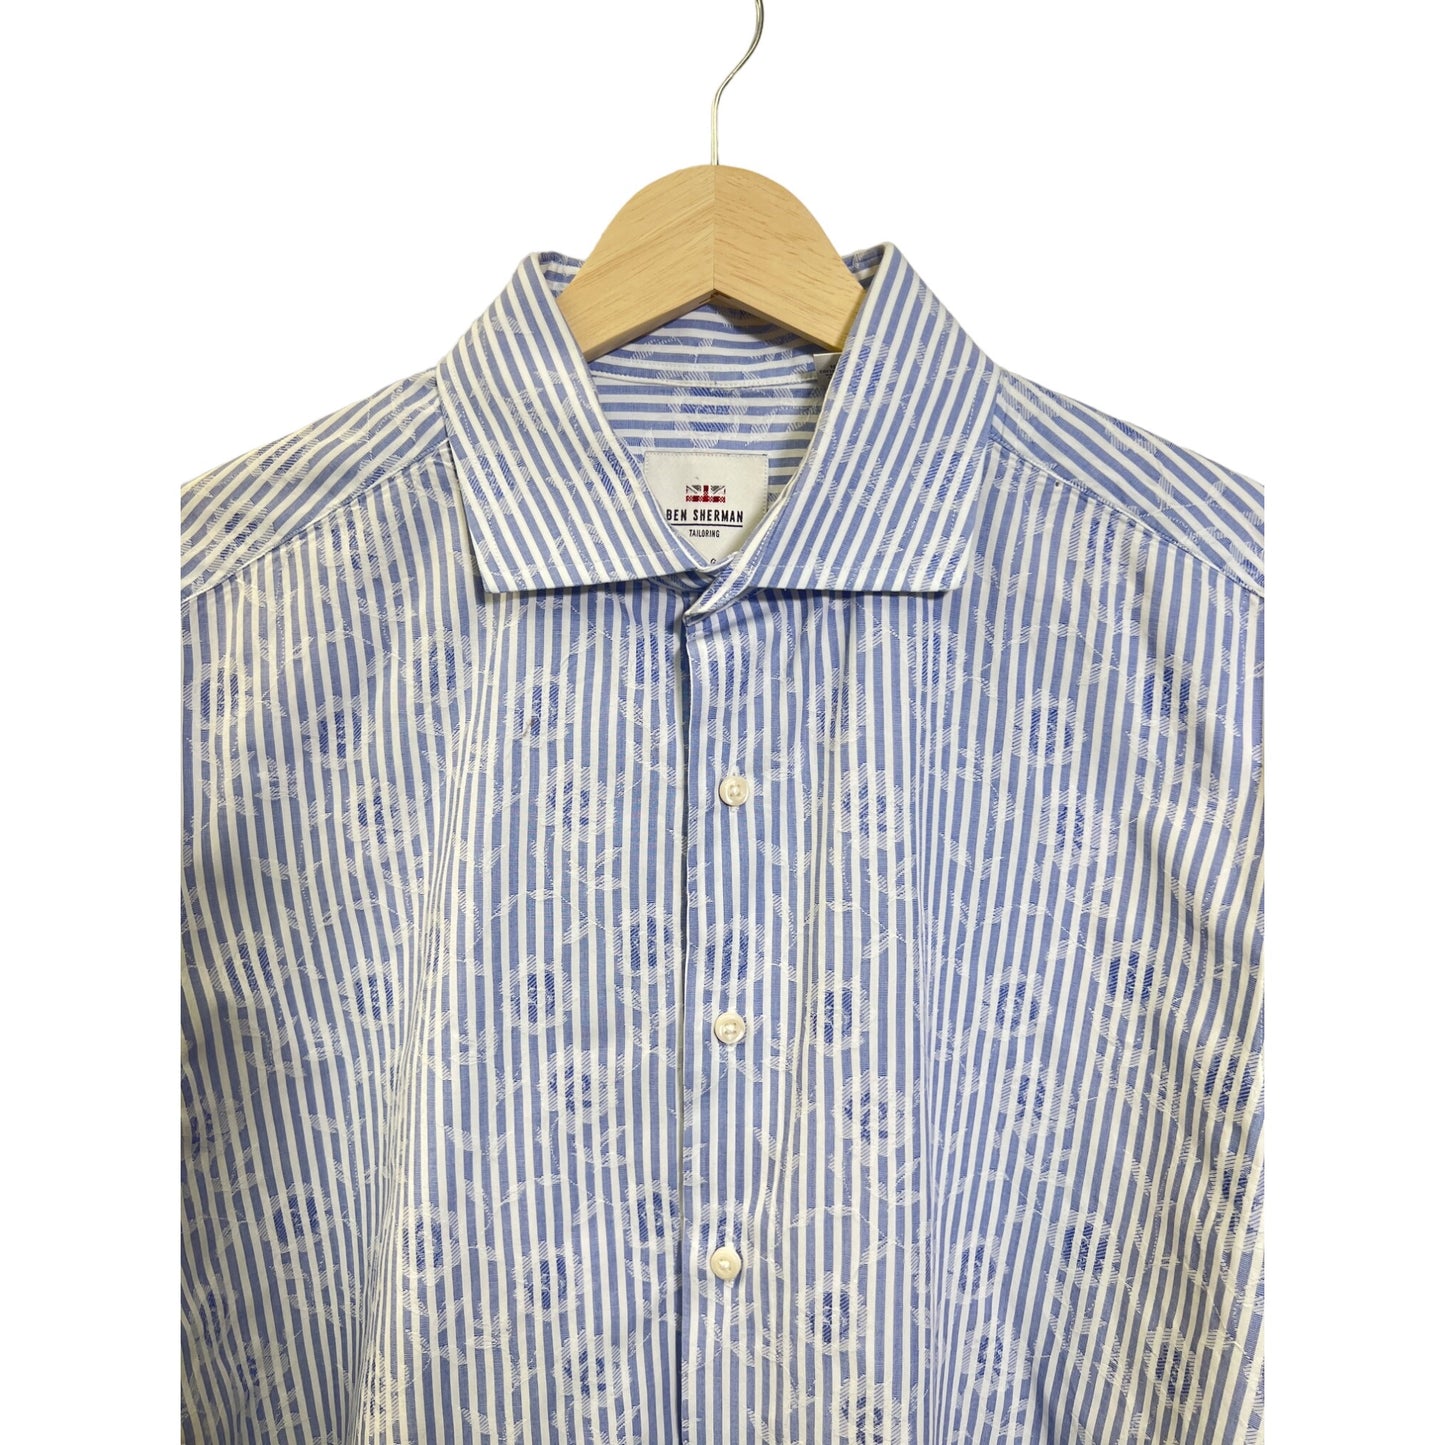 Ben Sherman Tailored Slim Fit Blue Stripe Floral Overlay Button Down Shirt